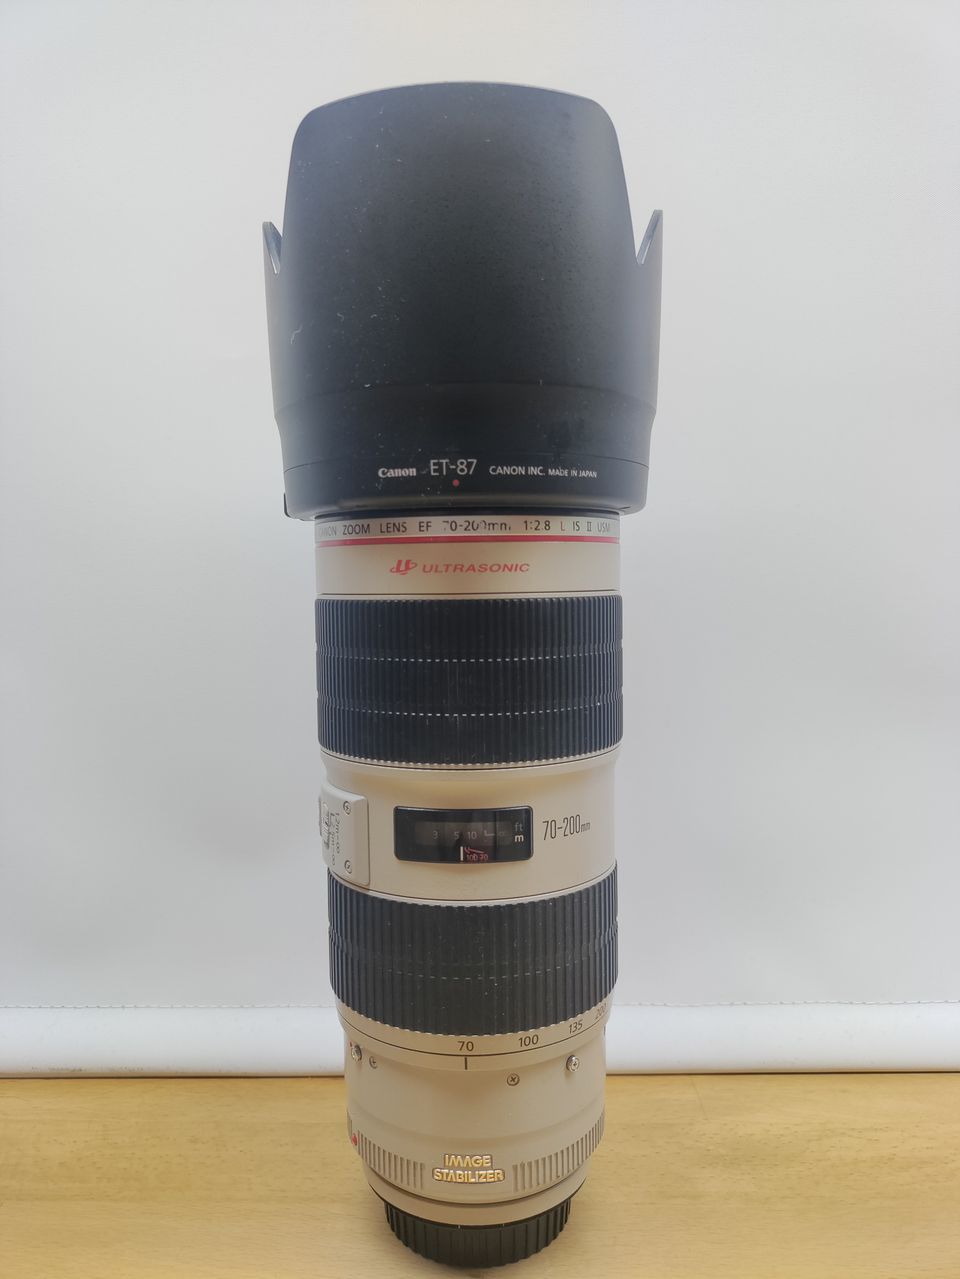 Canon EF 70-200 f2.8 L II is usm